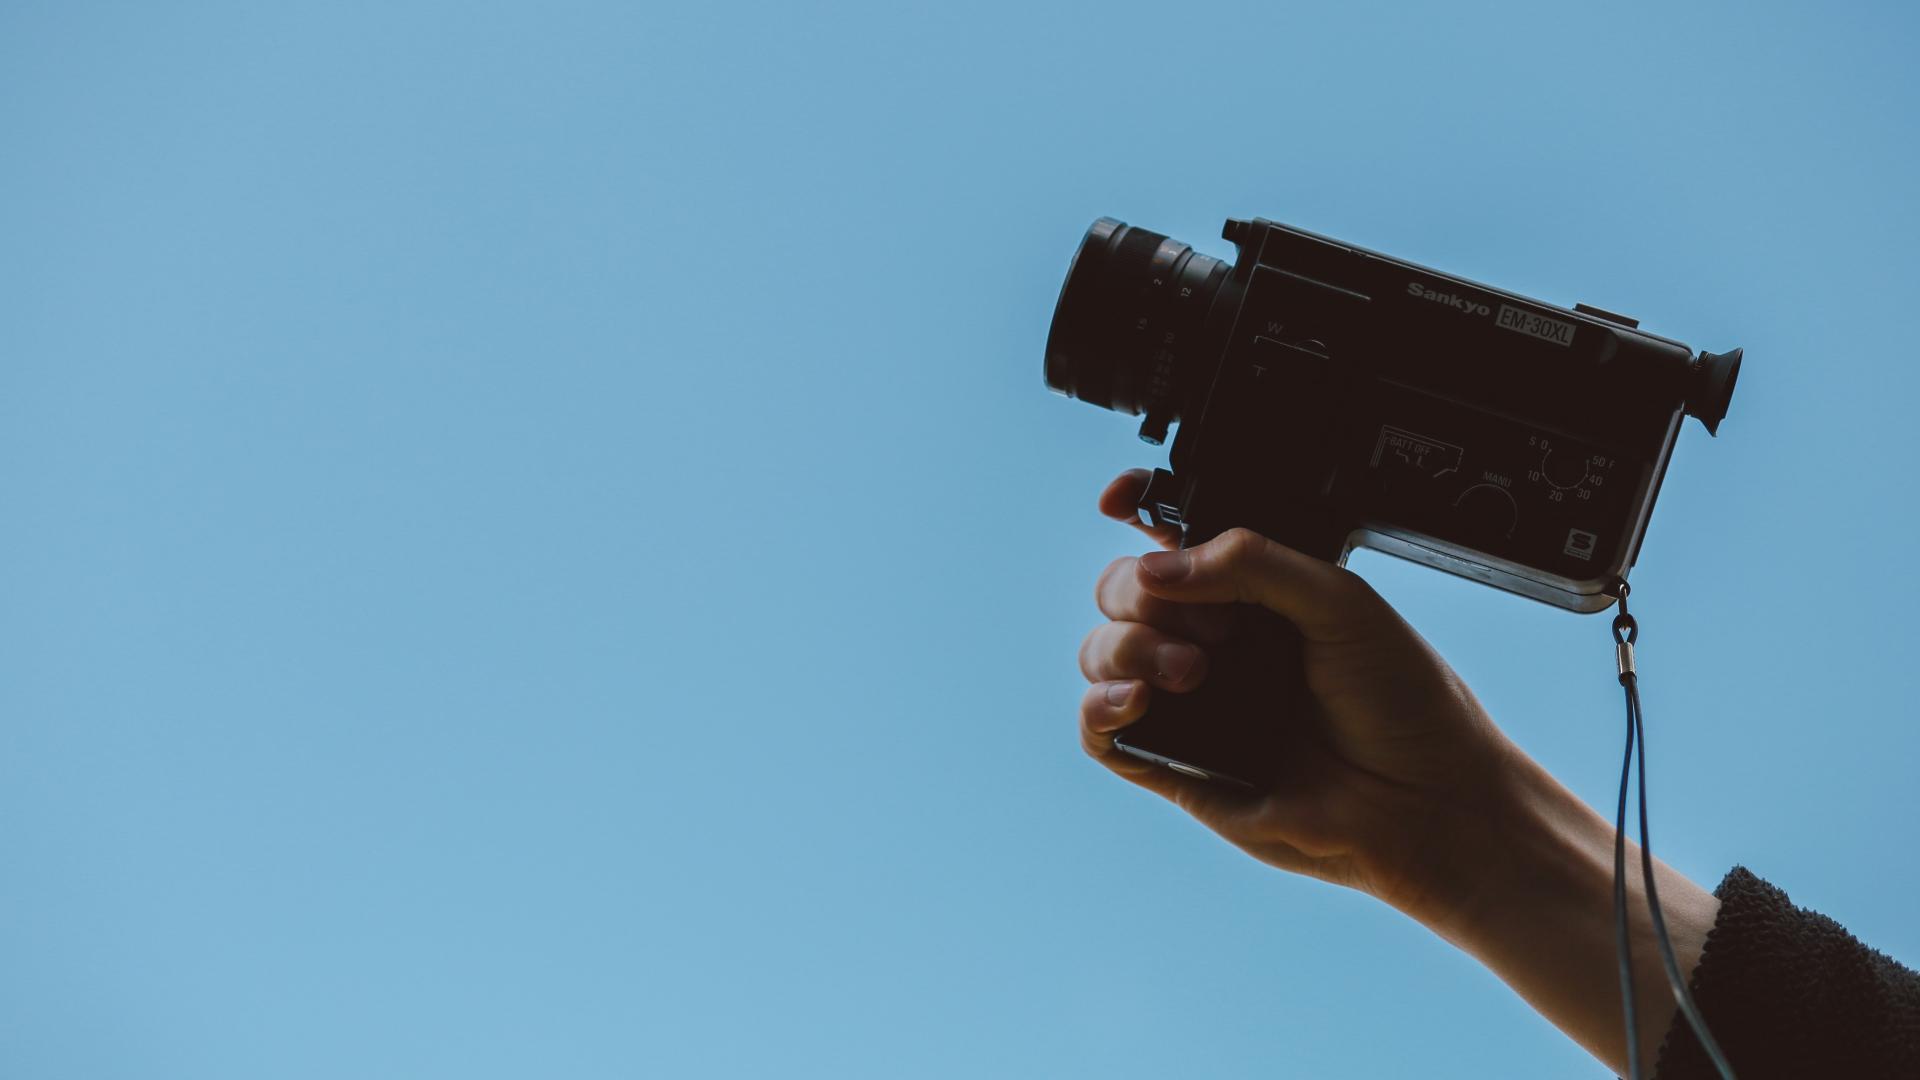 Hand holding a video camera aloft against a blue background